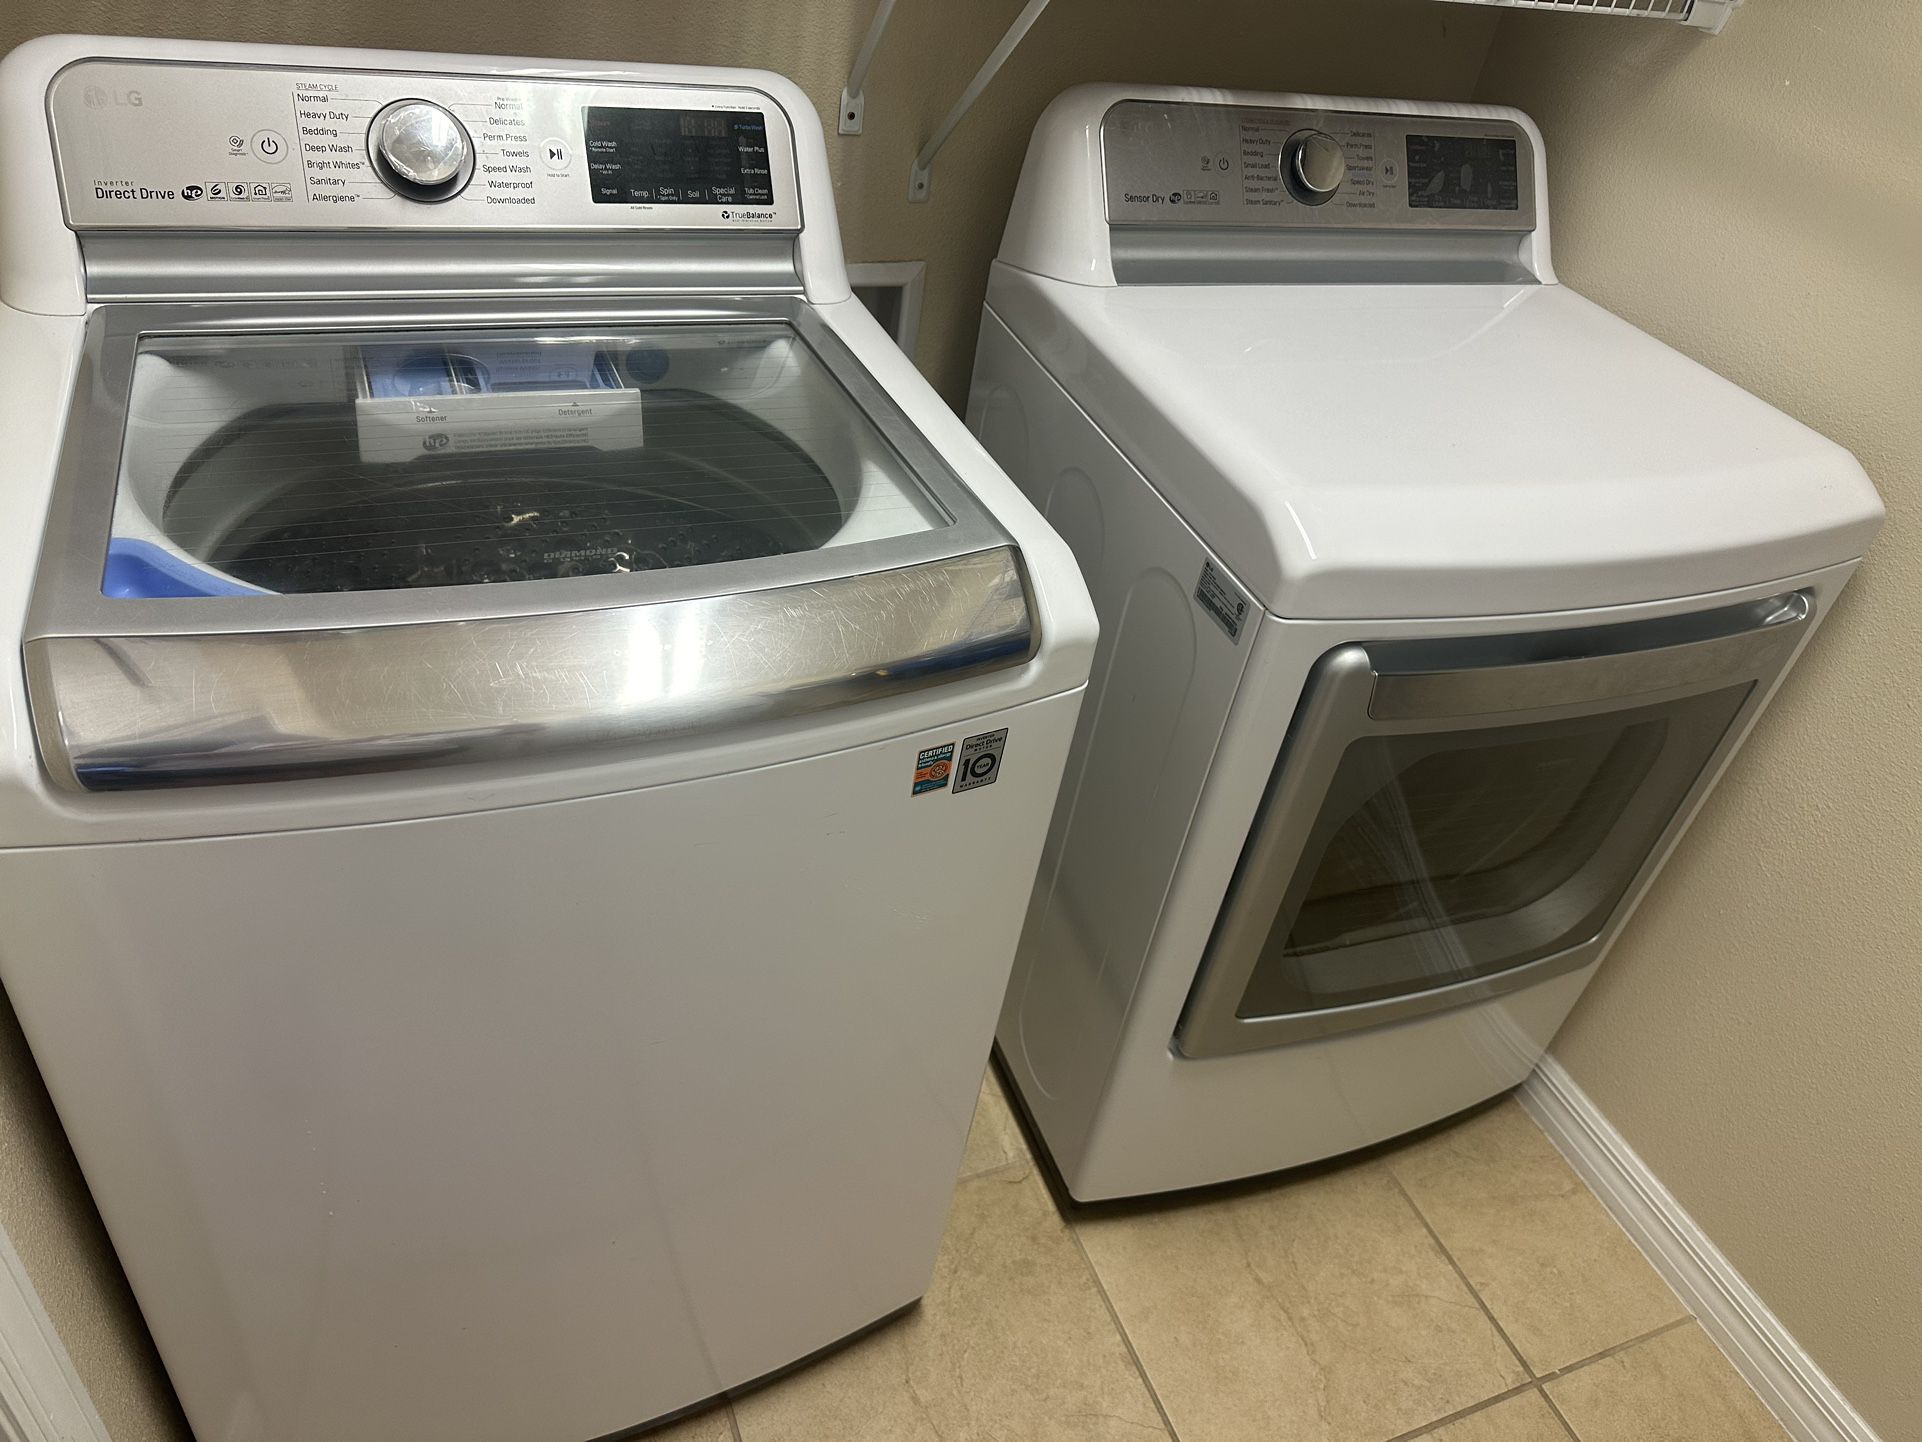 LG Washer And dryer Set 